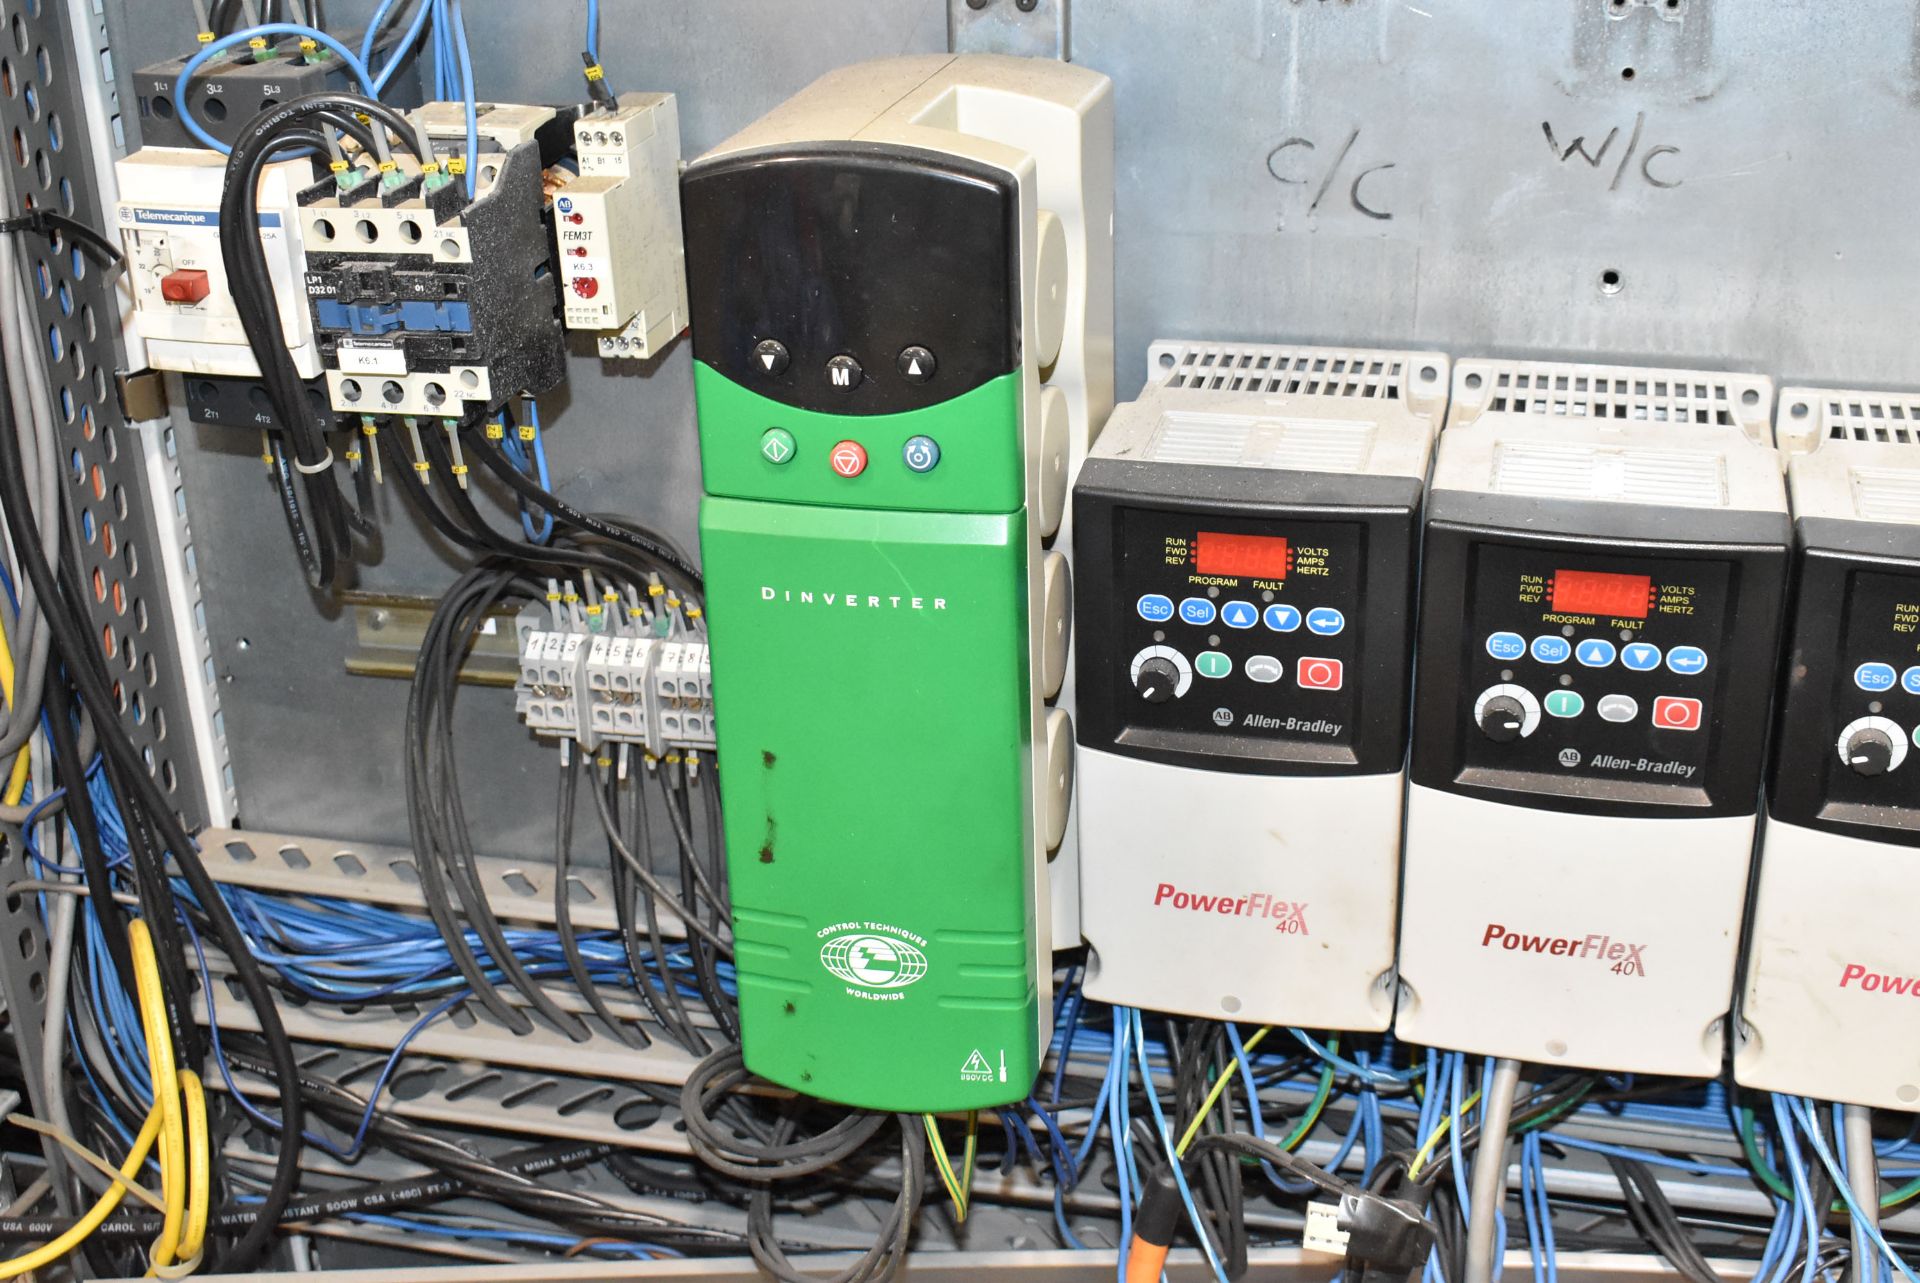 SOUDRONIC ABM270 SW CAN WELDER WITH FEEDER, SOUDRONIC TOUCH SCREEN PLC CONTROL, SET UP ON 65MM, 60 - Image 18 of 23